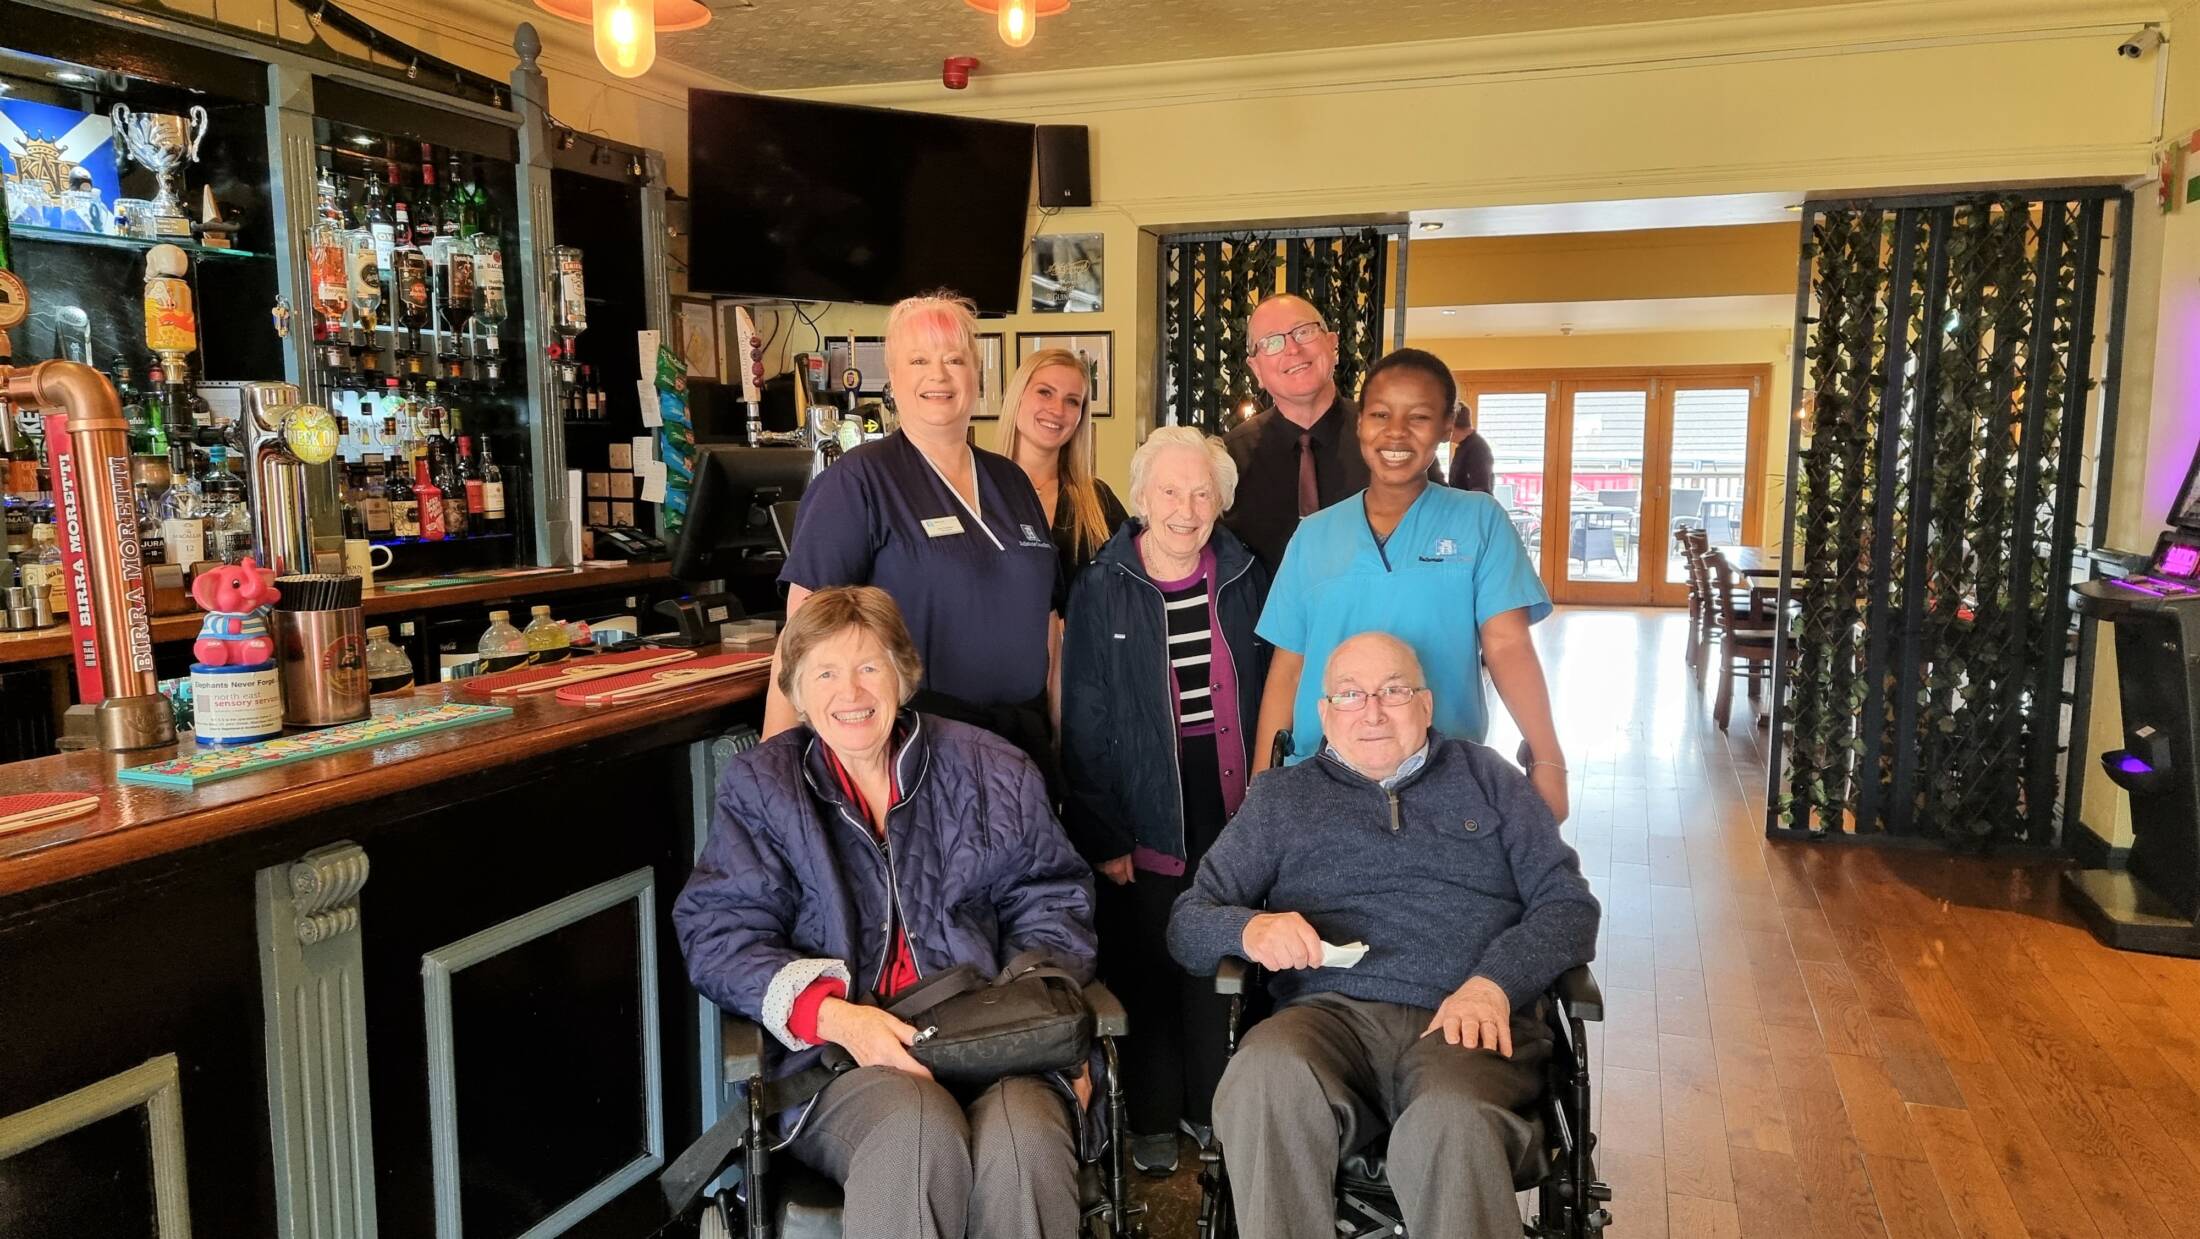 Carers and residents in a pub - two at front in wheelchairs